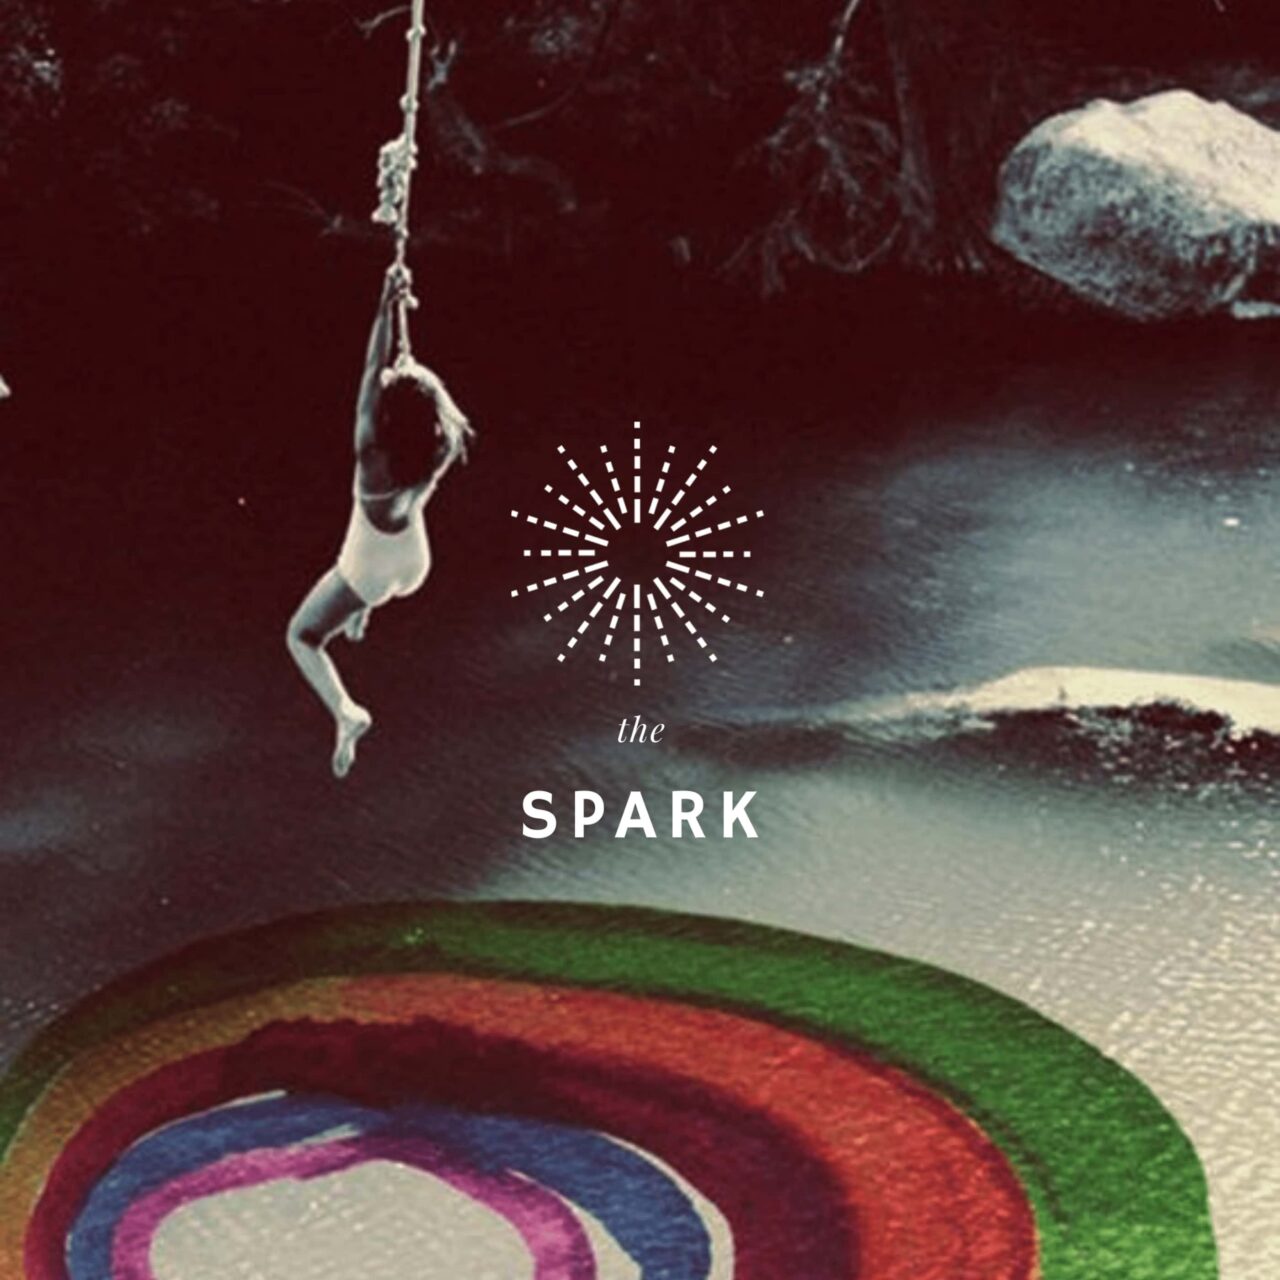 Welcome to Spark